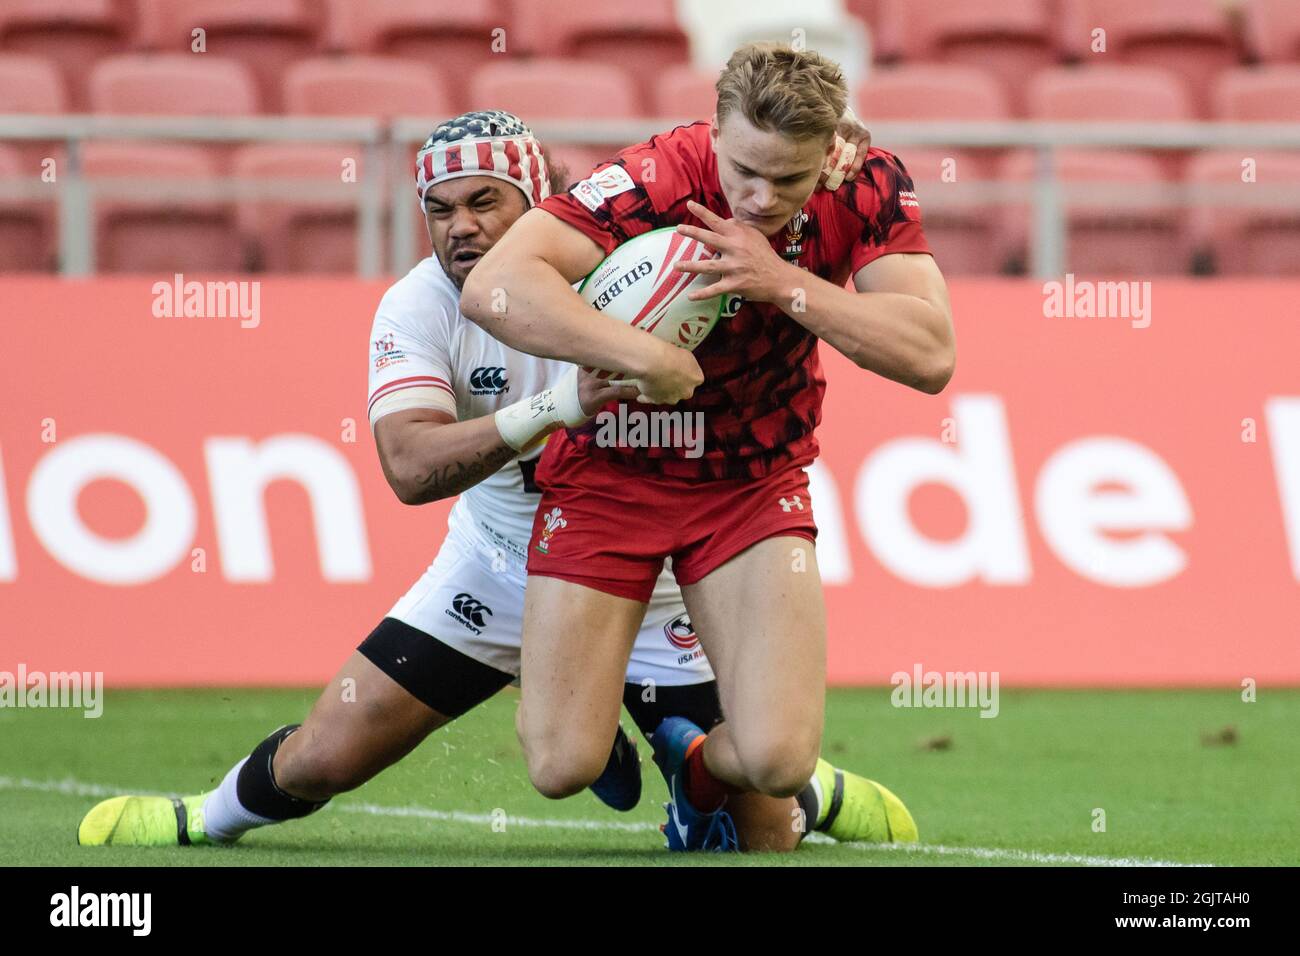 SINGAPORE-APRIL 13:Wales 7s Team (red) plays against USA 7s team (white) during Day 1 of HSBC World Rugby Singapore Sevens on April 13, 2019 at National Stadium in Singapore Stock Photo